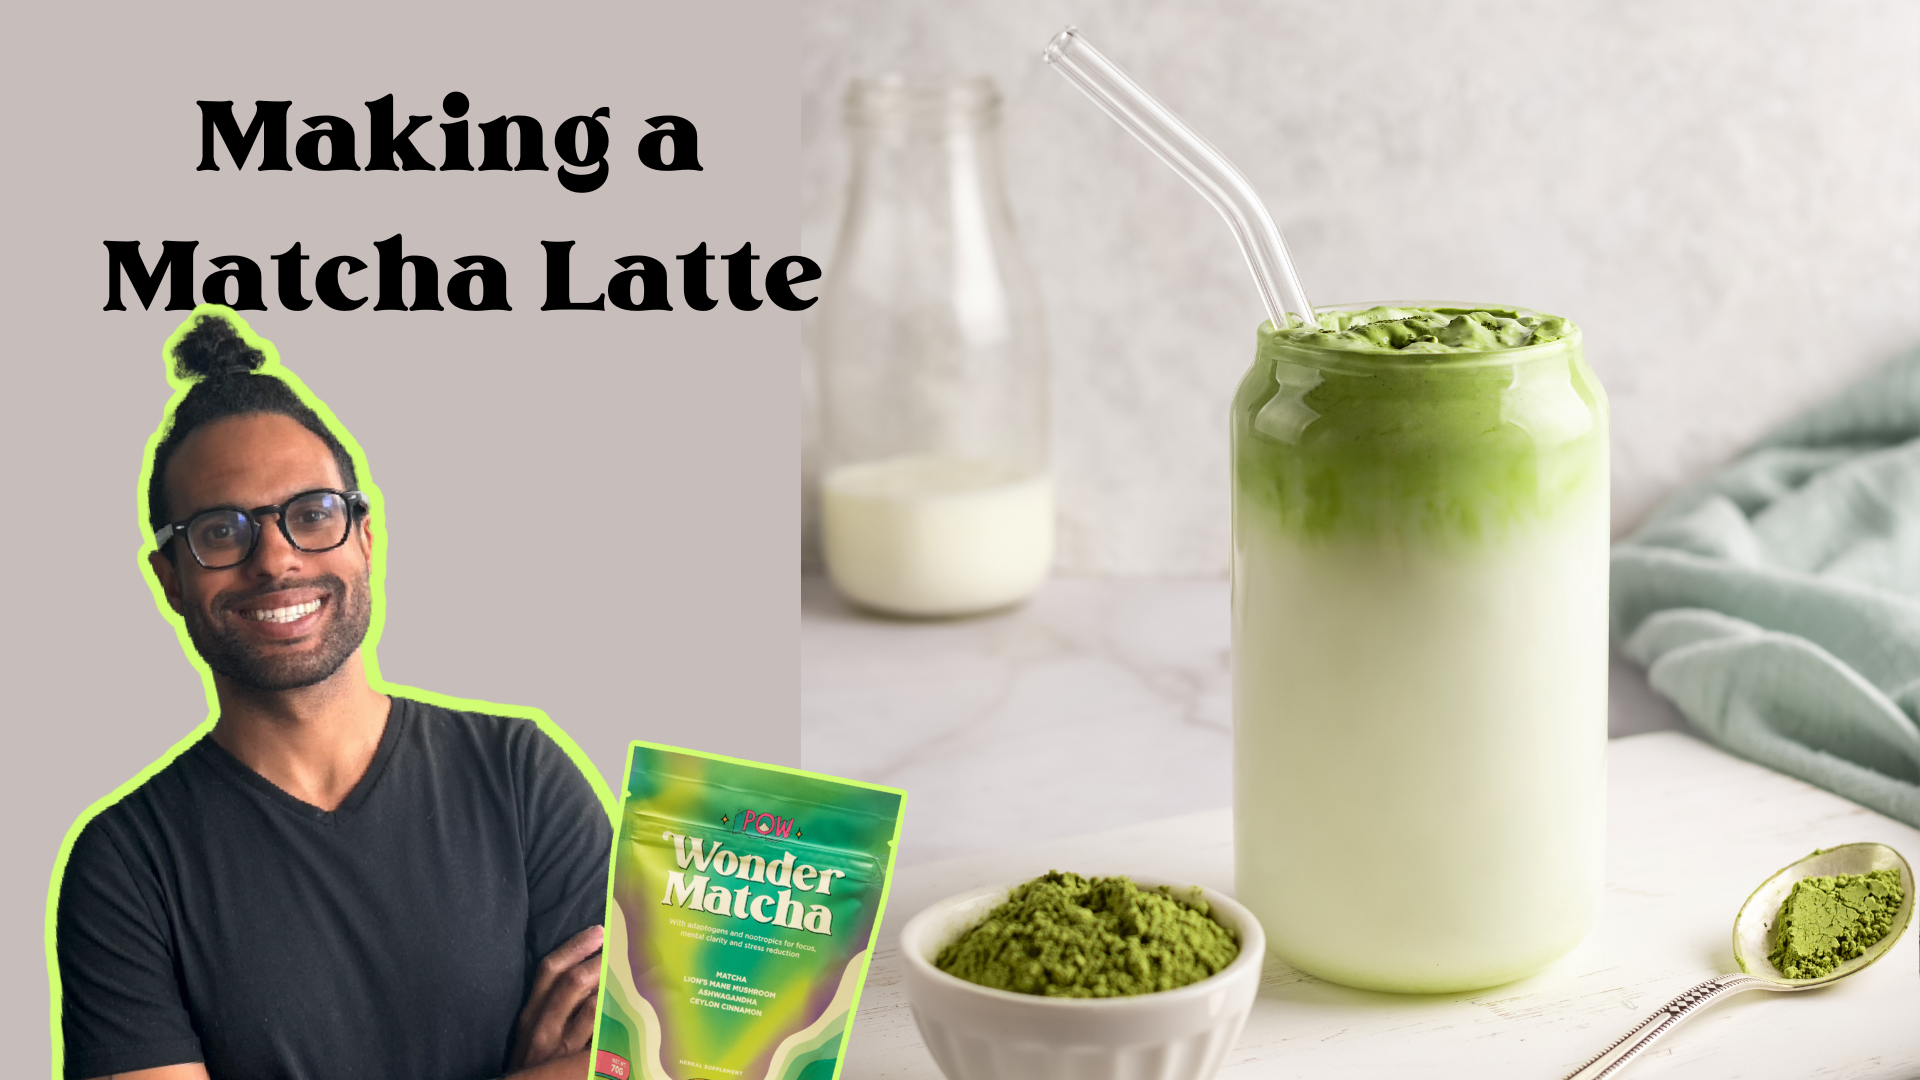 Tips For Making a Matcha Latte